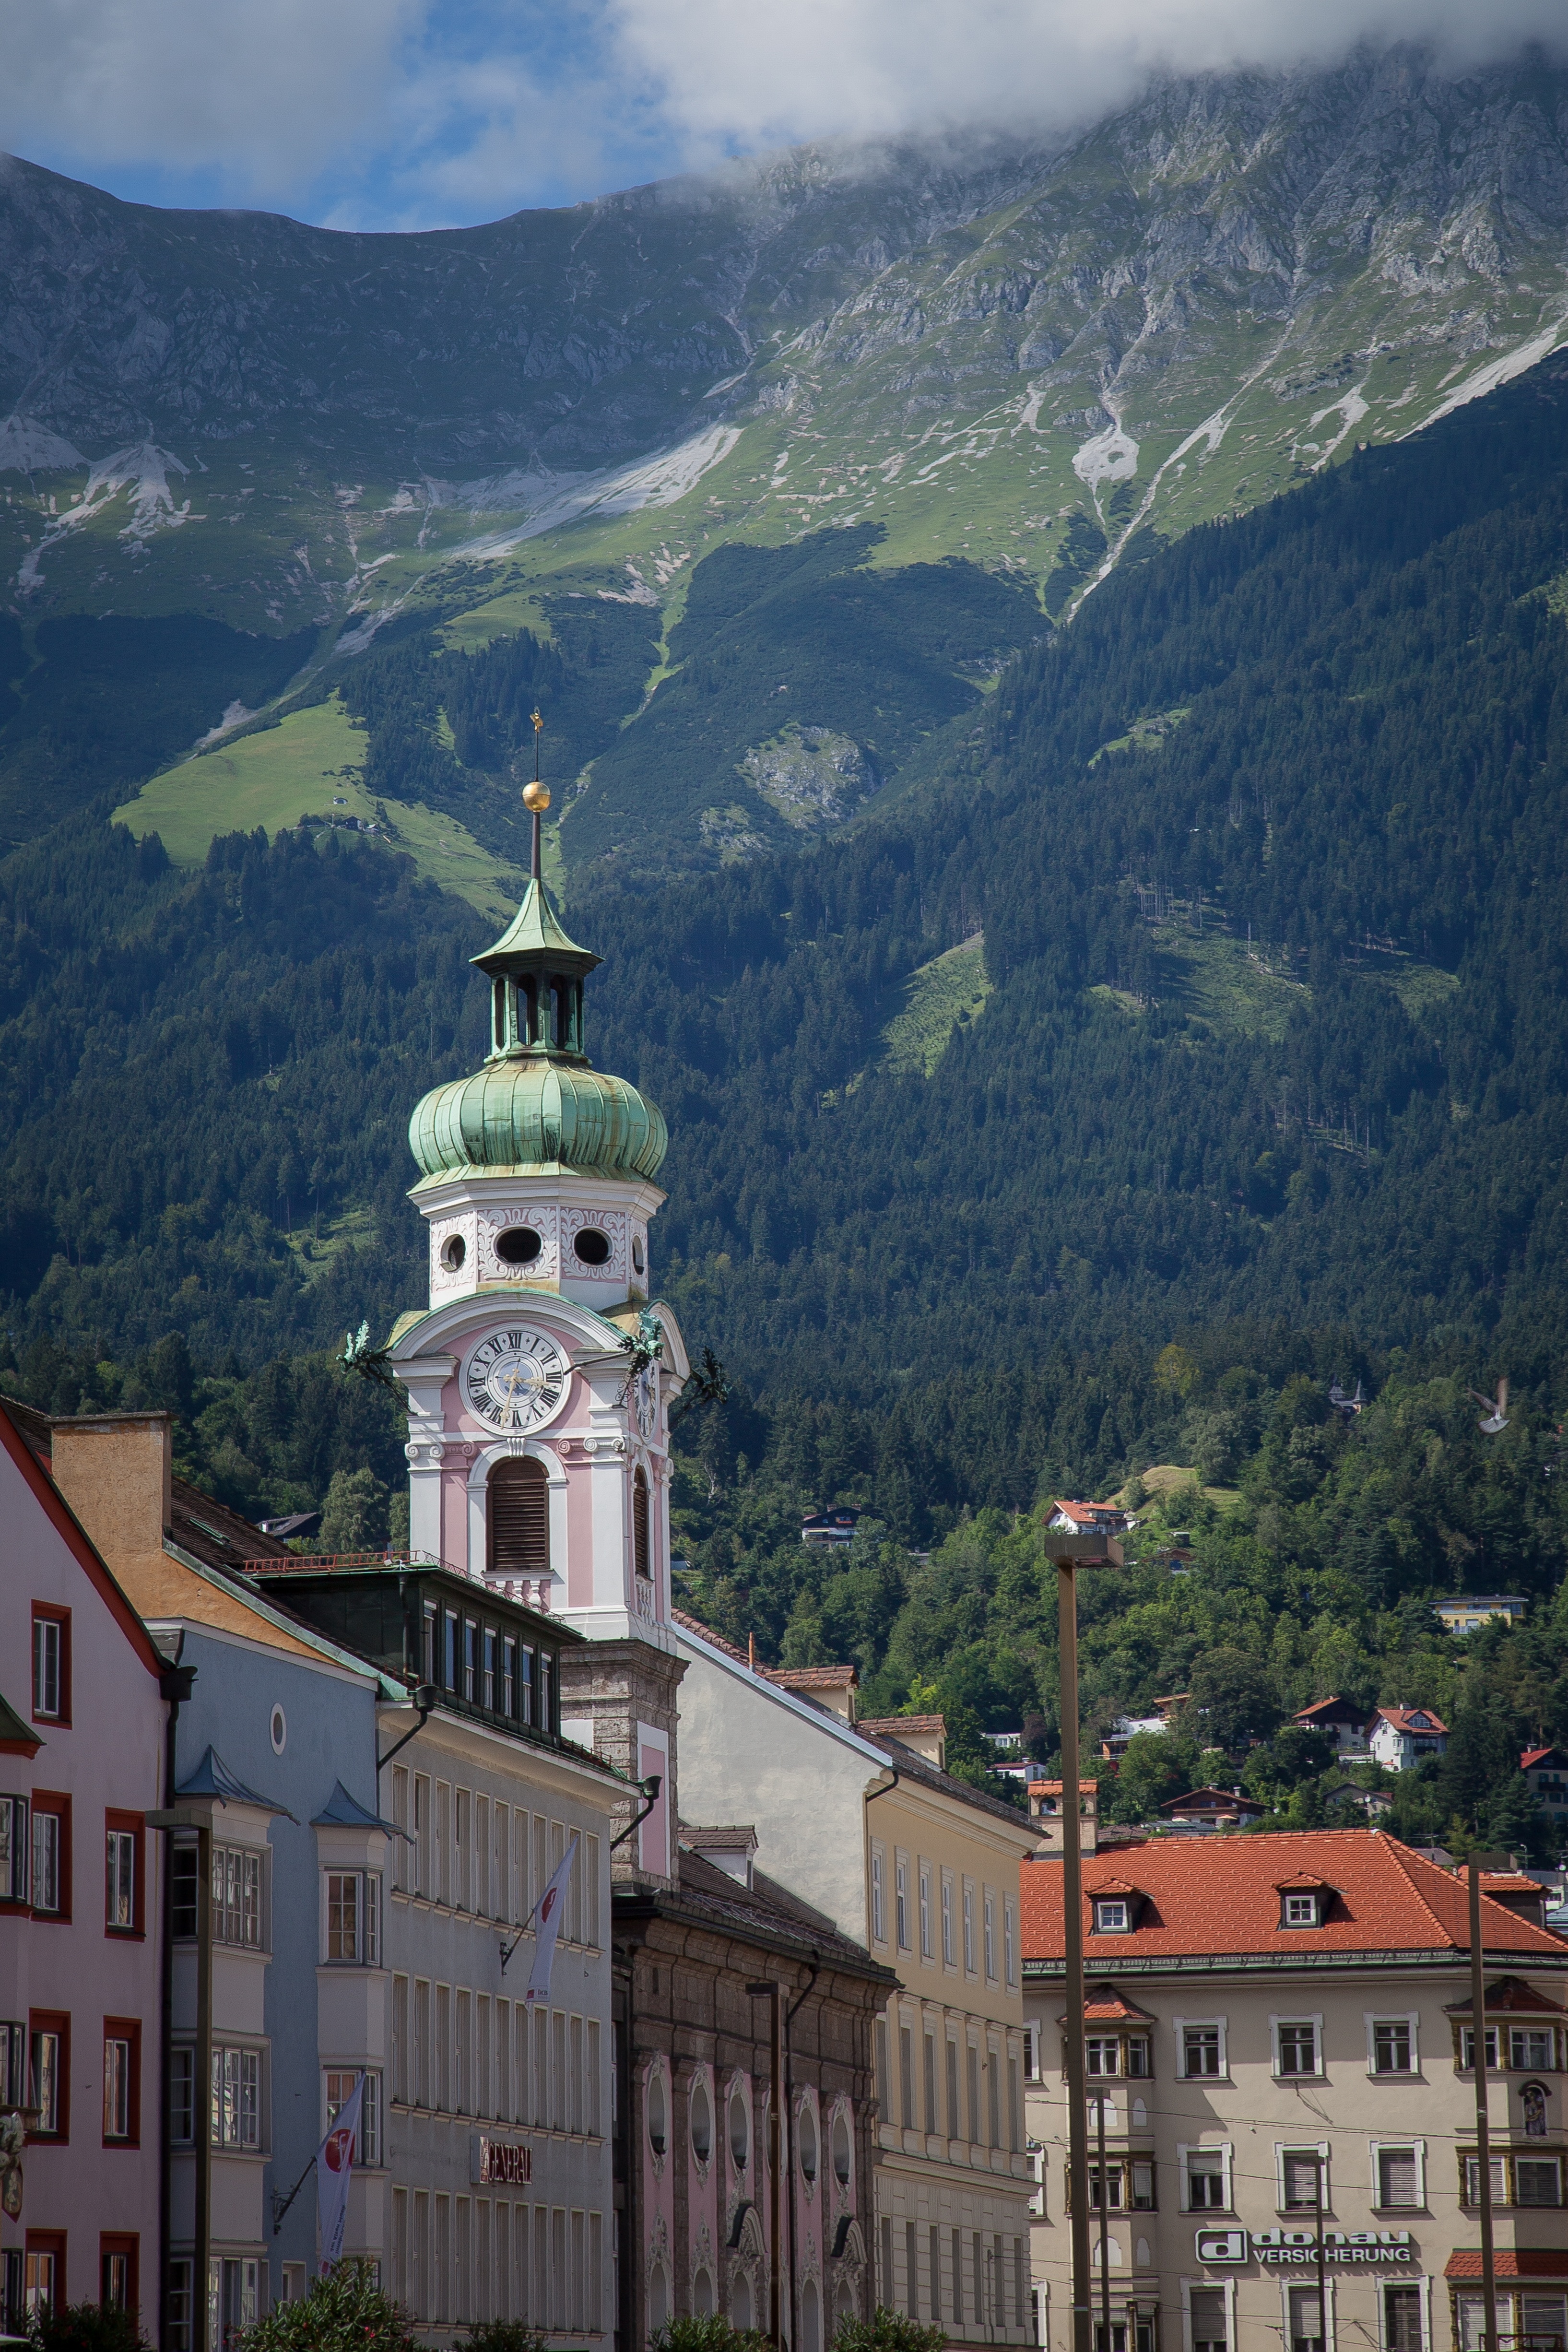 Homes, Nordkette, City View, Innsbruck, mountain, architecture